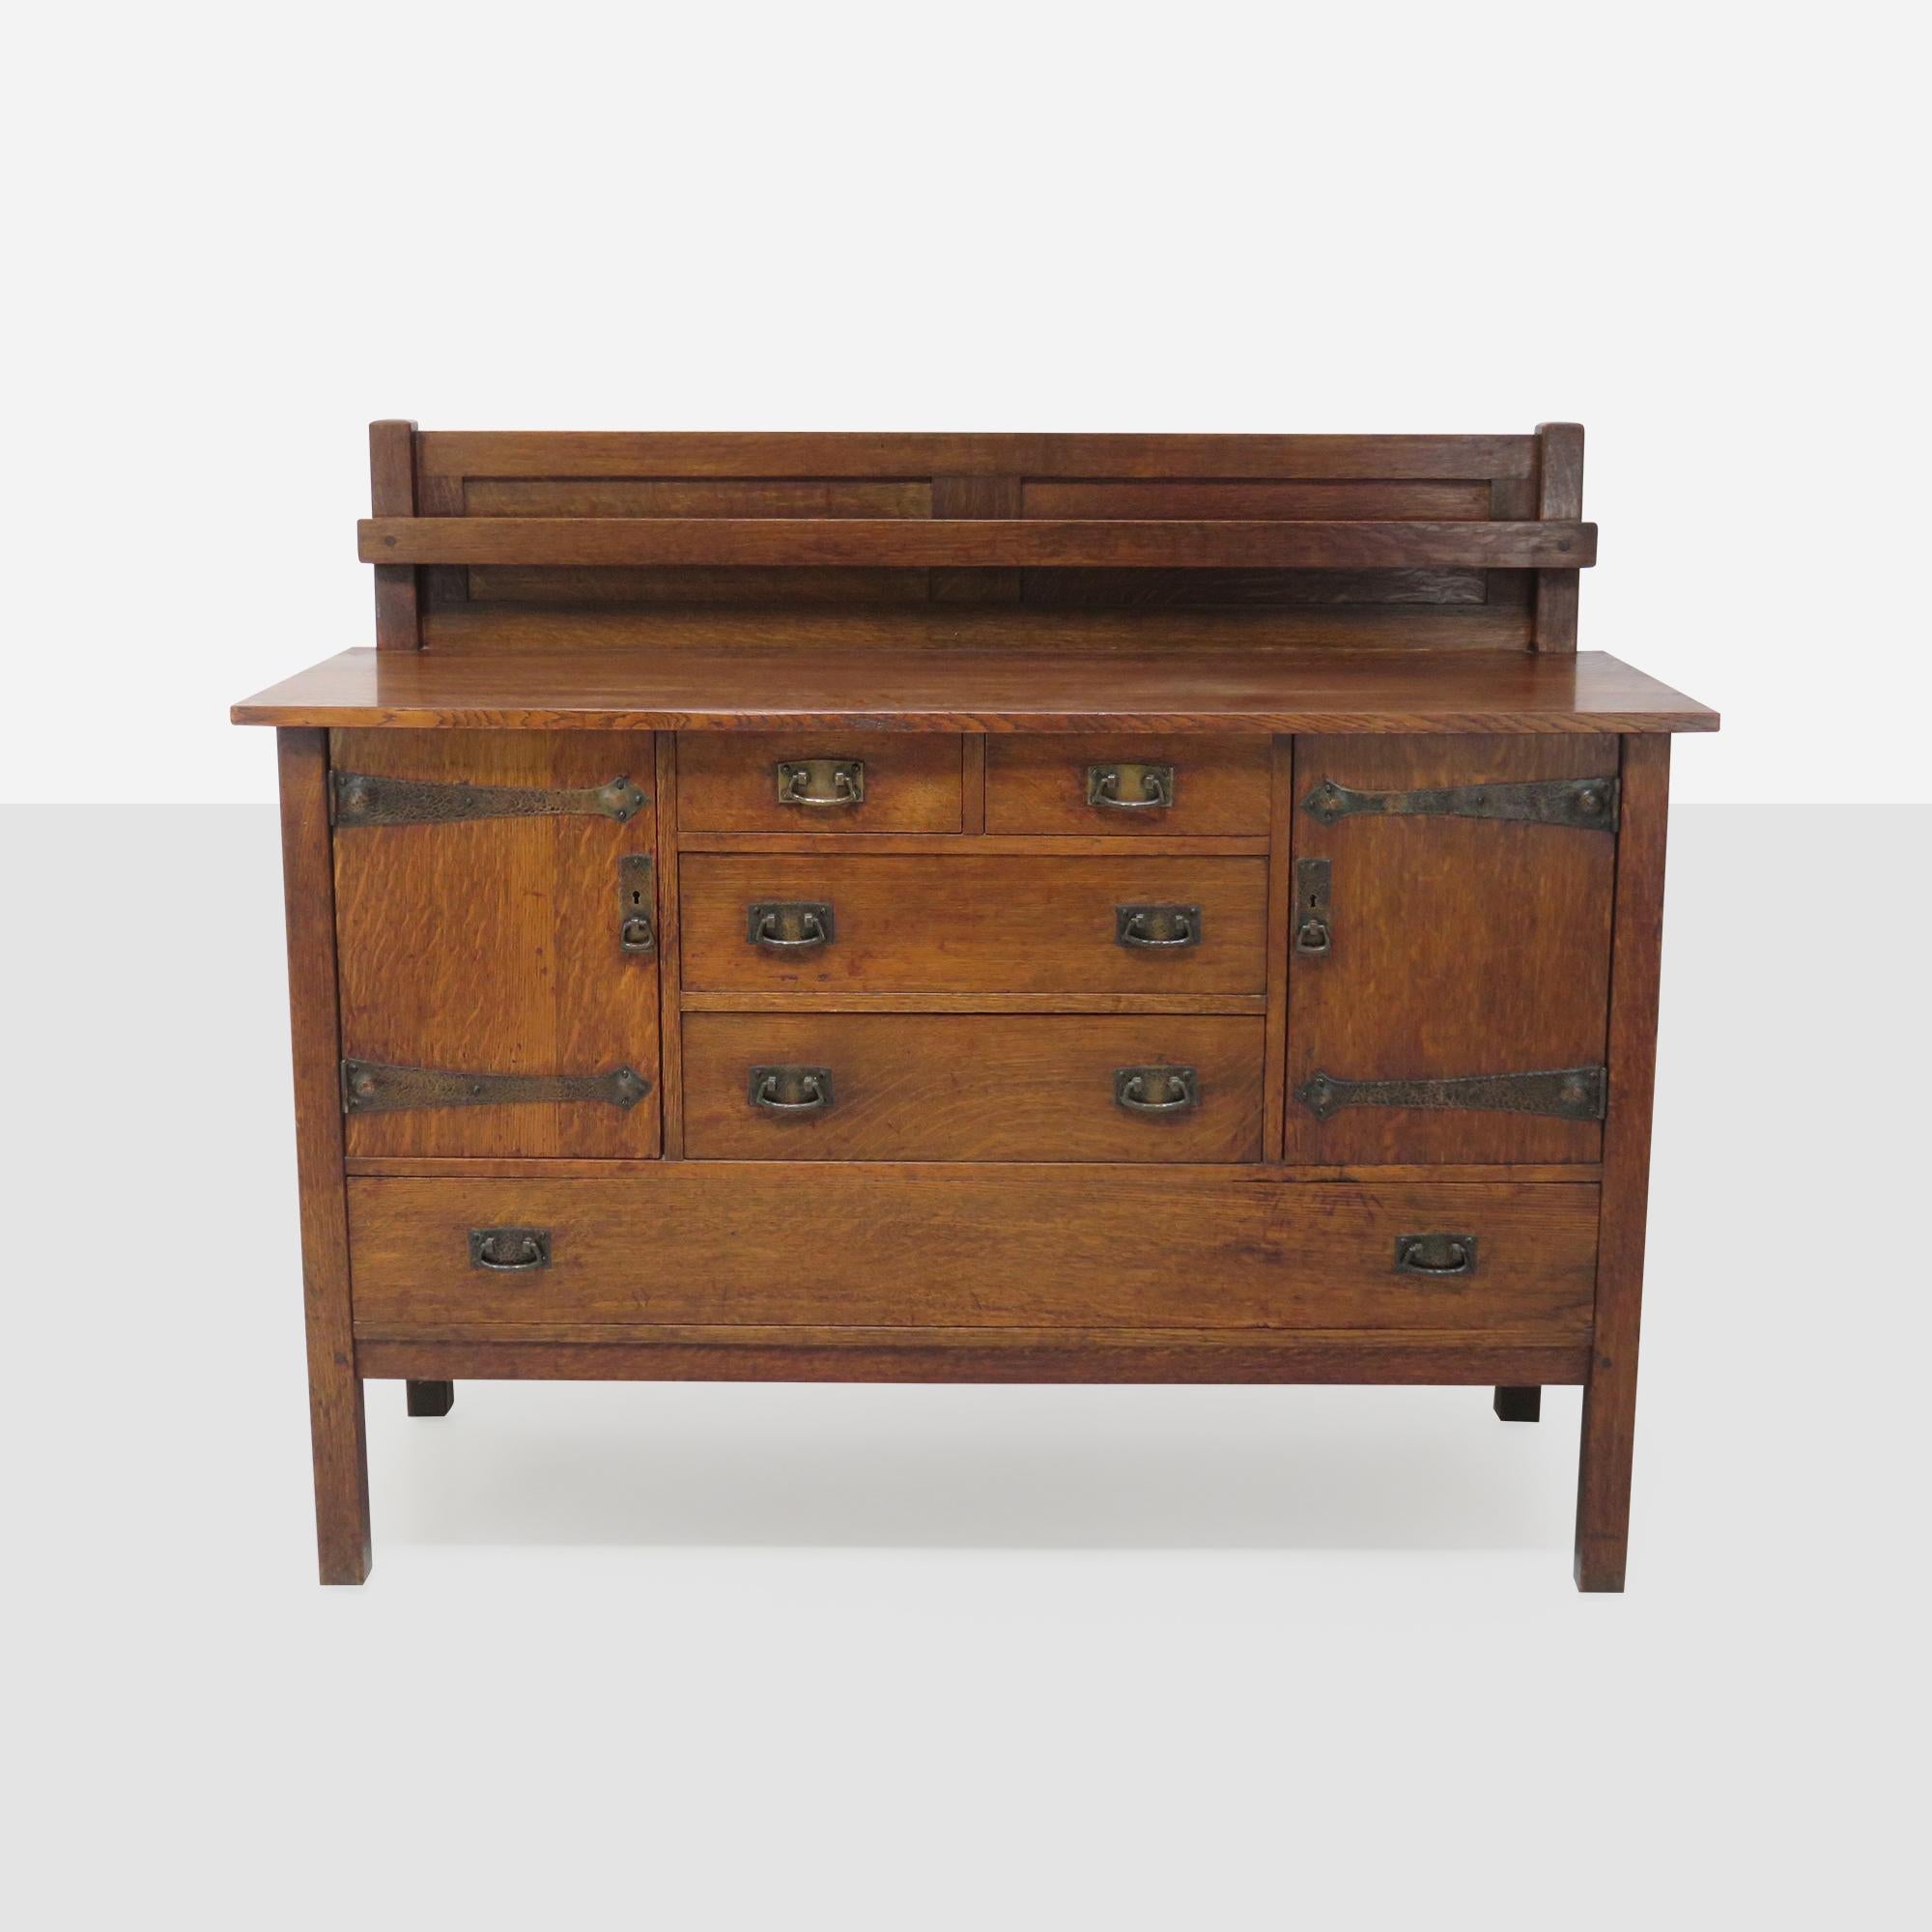 Early sideboard, model 814, by Leopold & John Stickley In Good Condition For Sale In San Francisco, CA